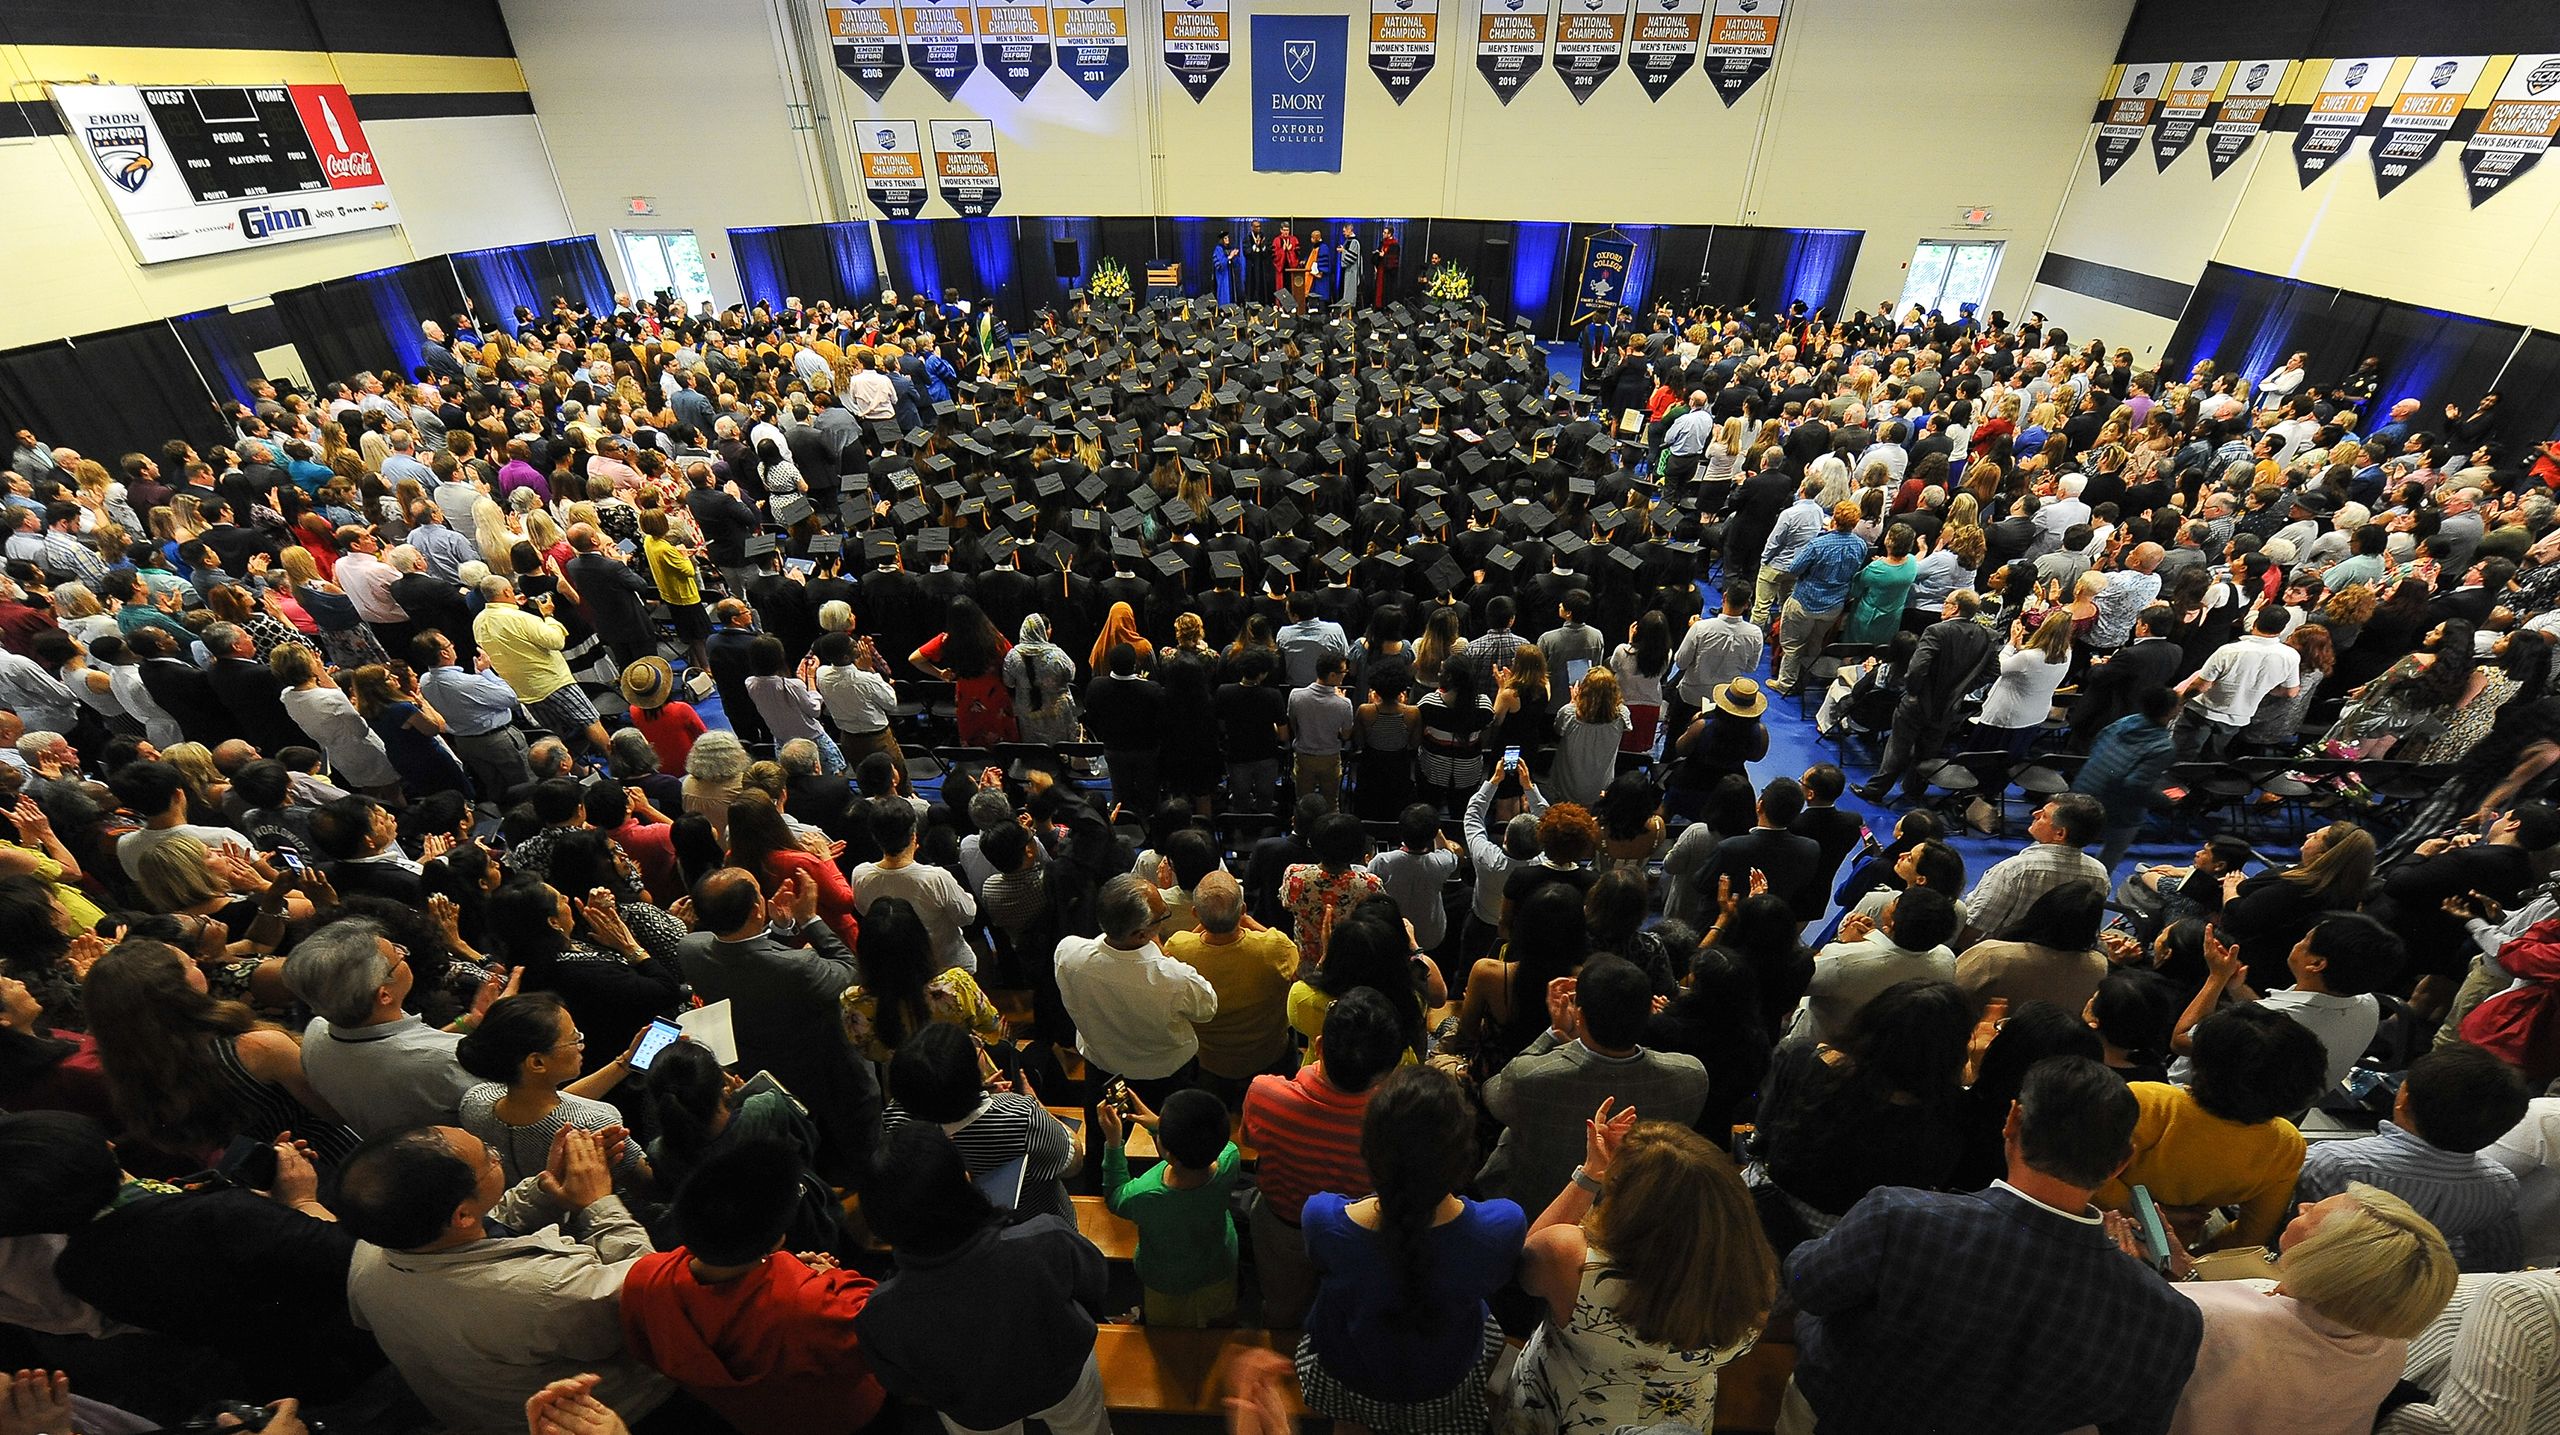 Commencement audience in Williams Gymnasium